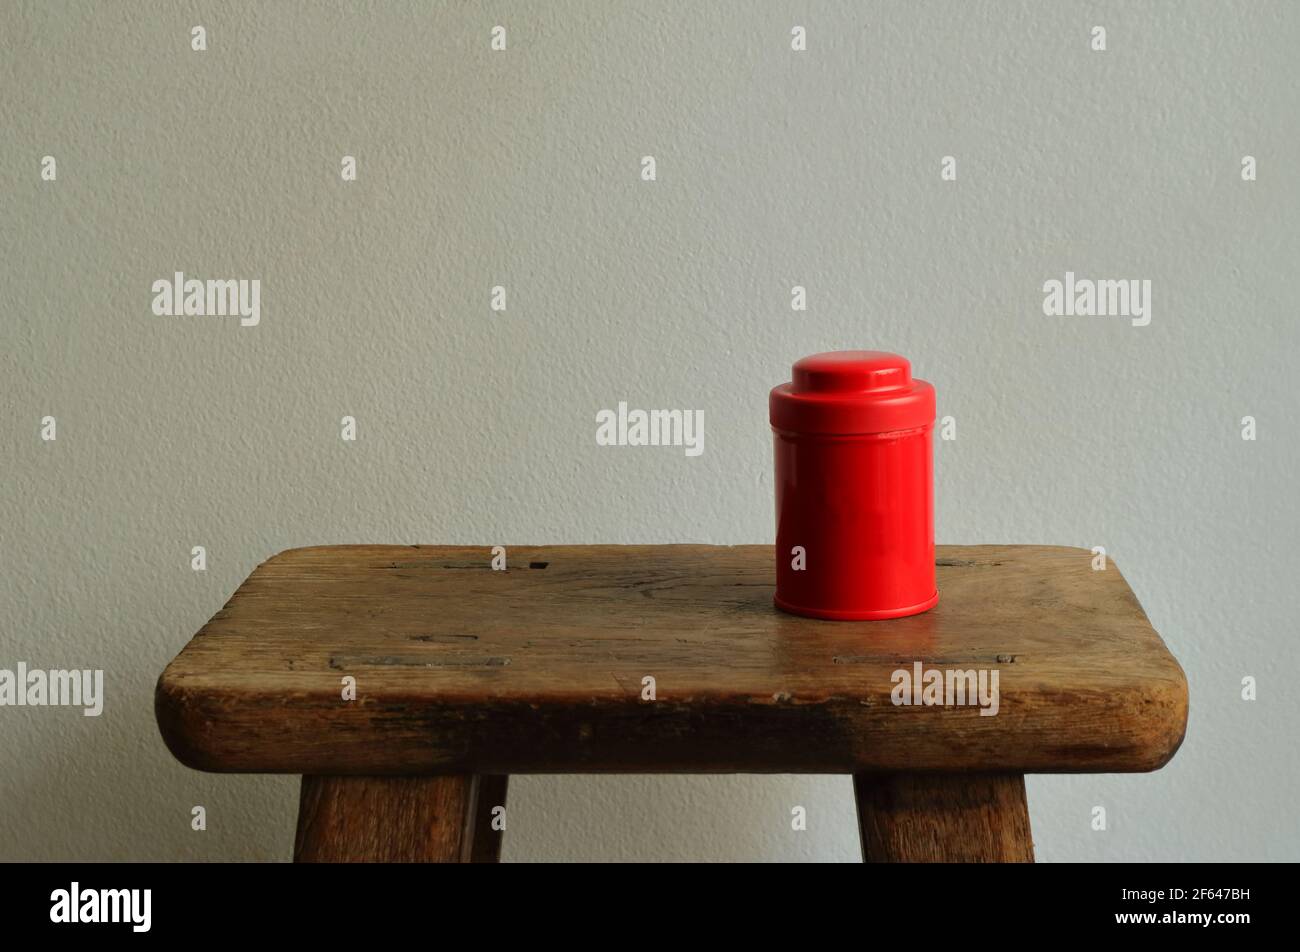 Closed lid red metal box standing on vintage wooden chair against white cement wall Stock Photo